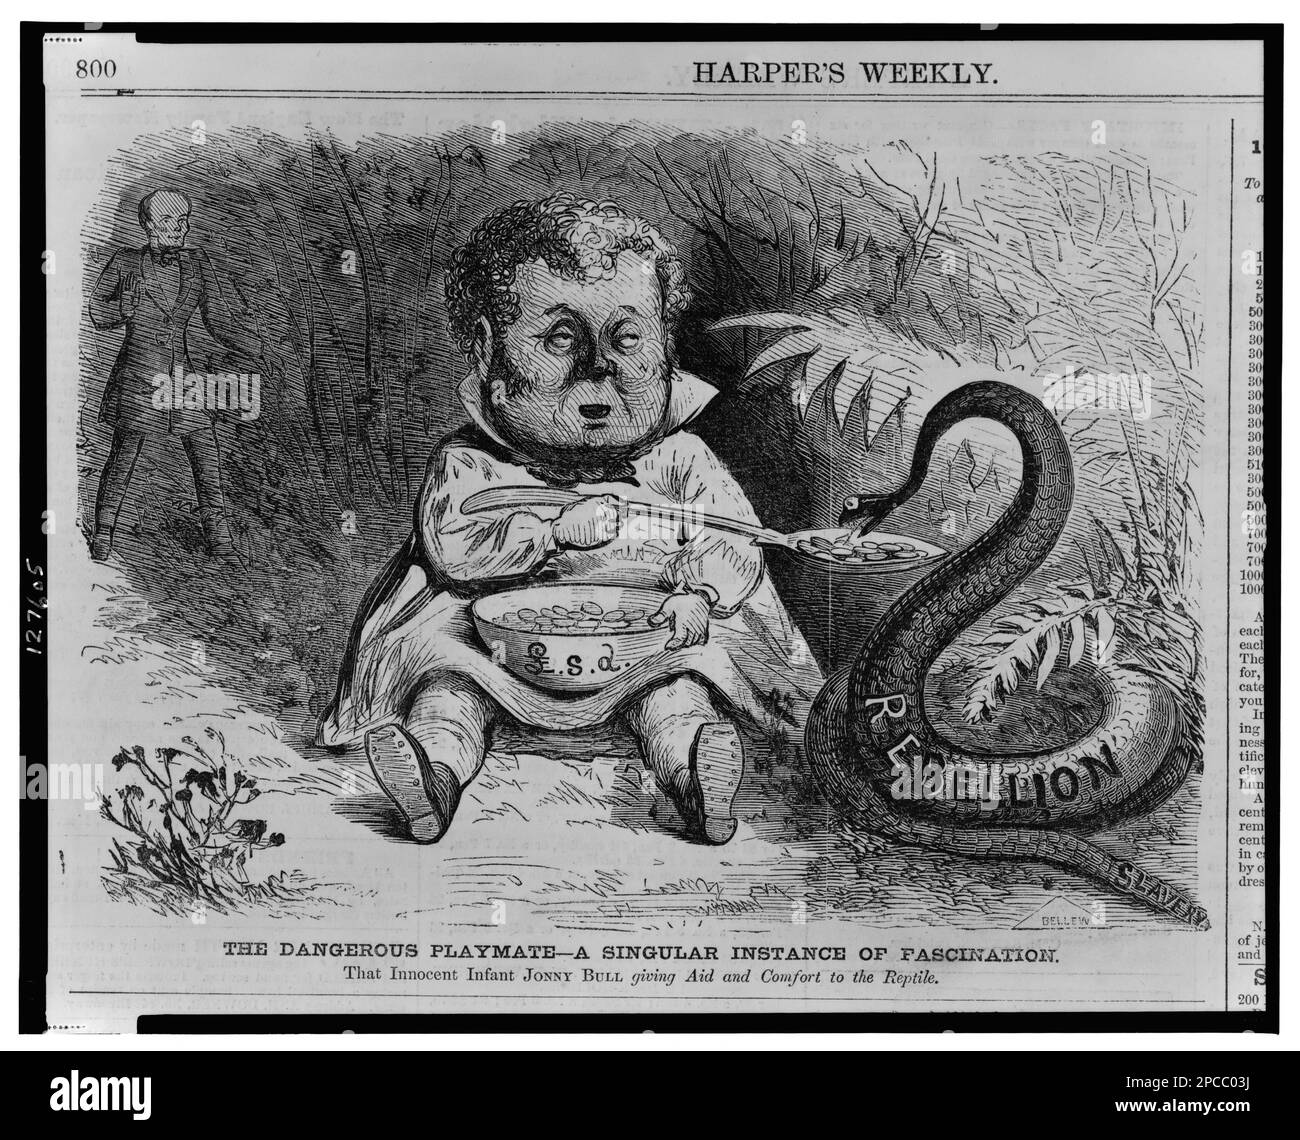 the dangerous playmate a singular instance of fascination illus in harpers weekly v 5 no 259 1861 dec 14 p 800 john bull symbolic character 1860 1870 snakes 1860 1870 united states history civil war 1861 1865 political aspects 2PCC03J